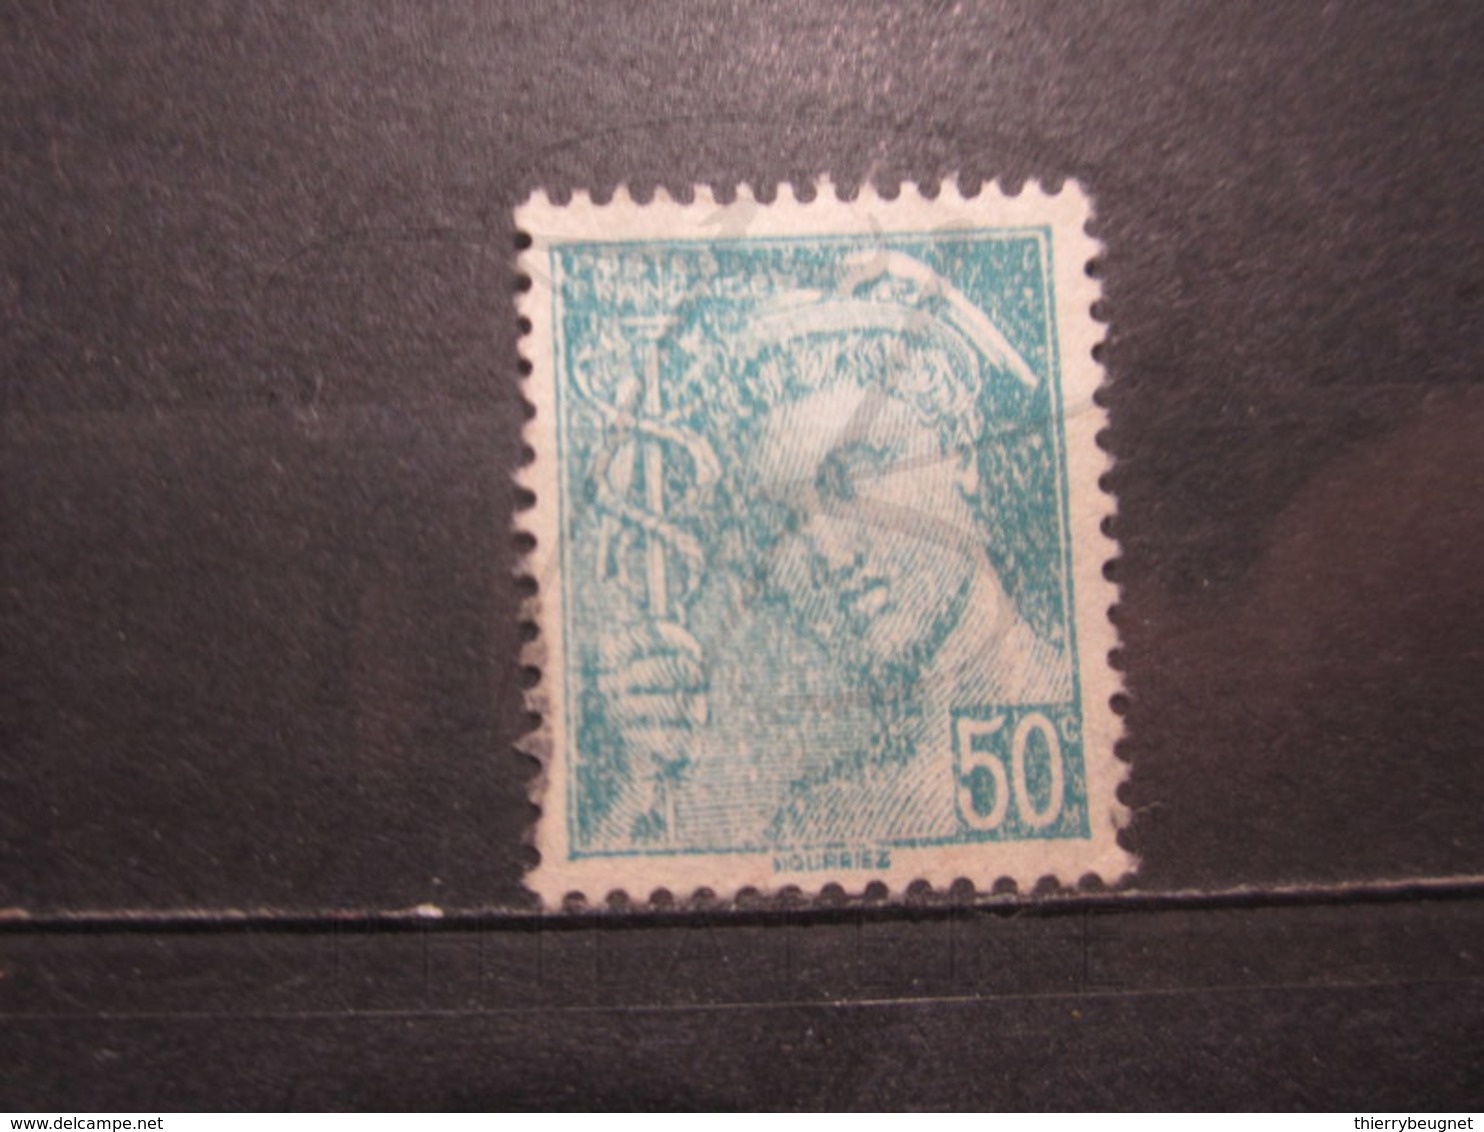 VEND BEAU TIMBRE FRANCE N° 549 , IMPRESSION DEFECTUEUSE !!! - Used Stamps